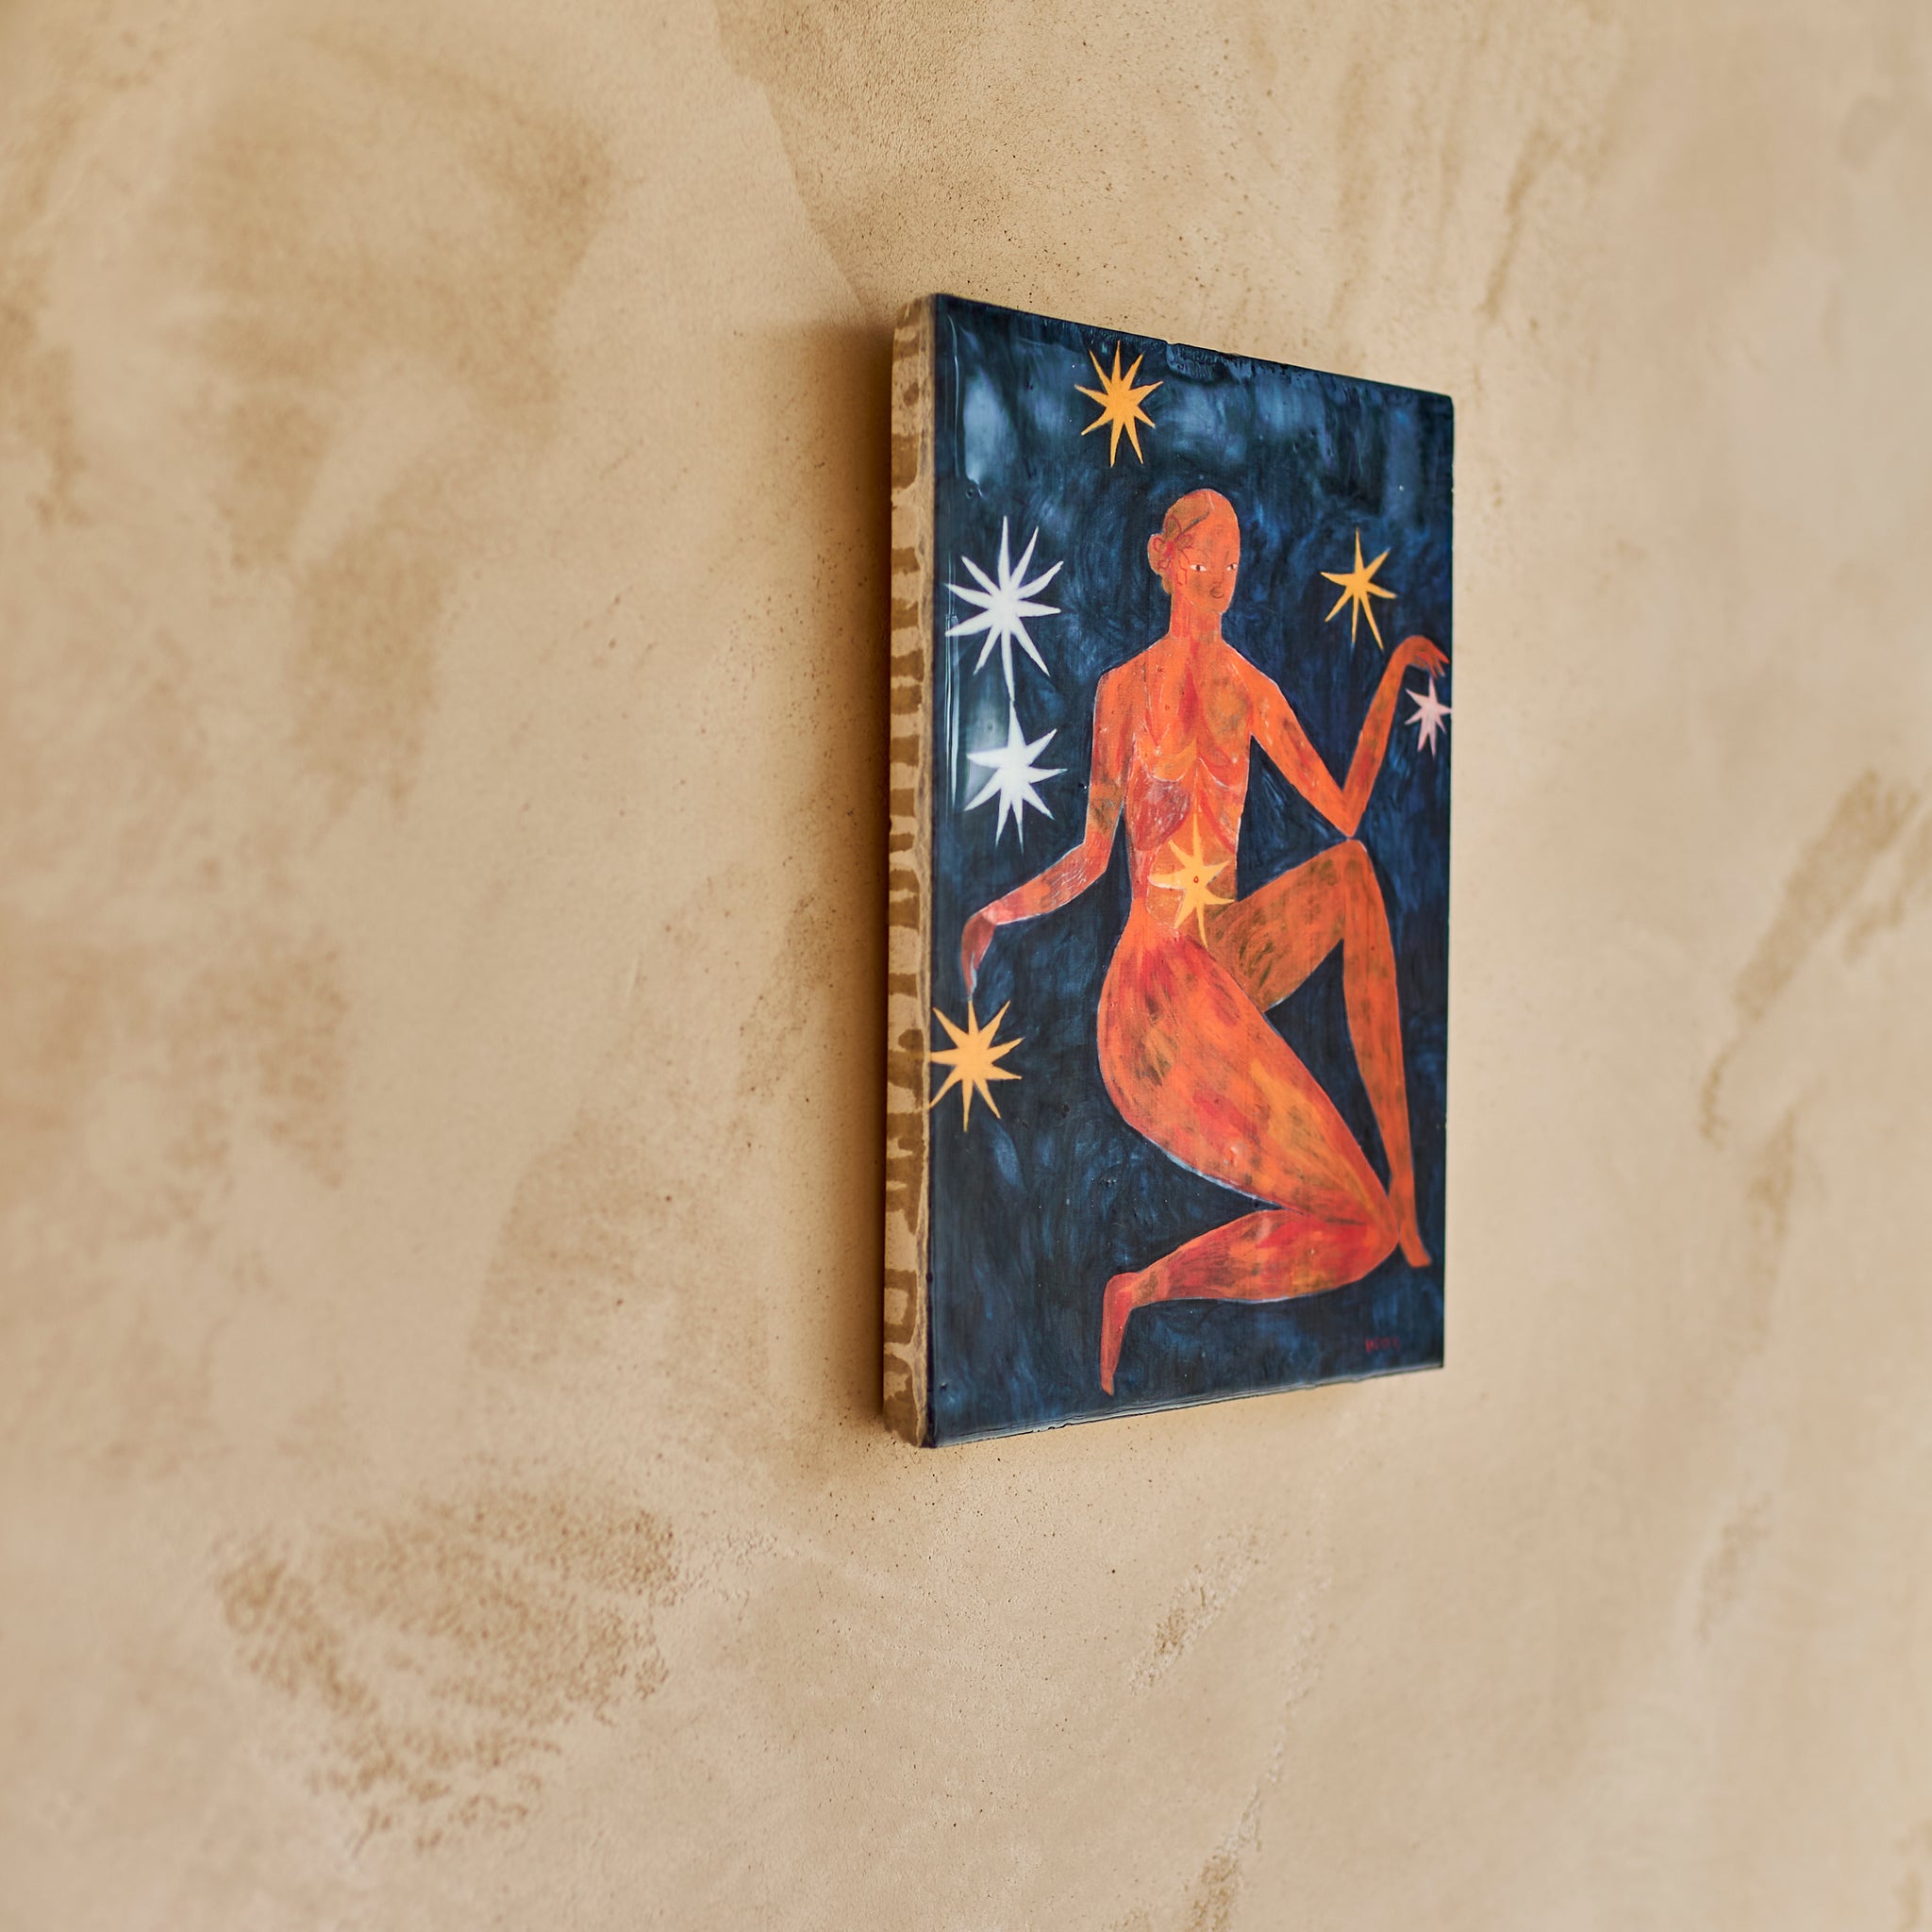 Una Notte A Palermo Limited Edition Tile (Large)